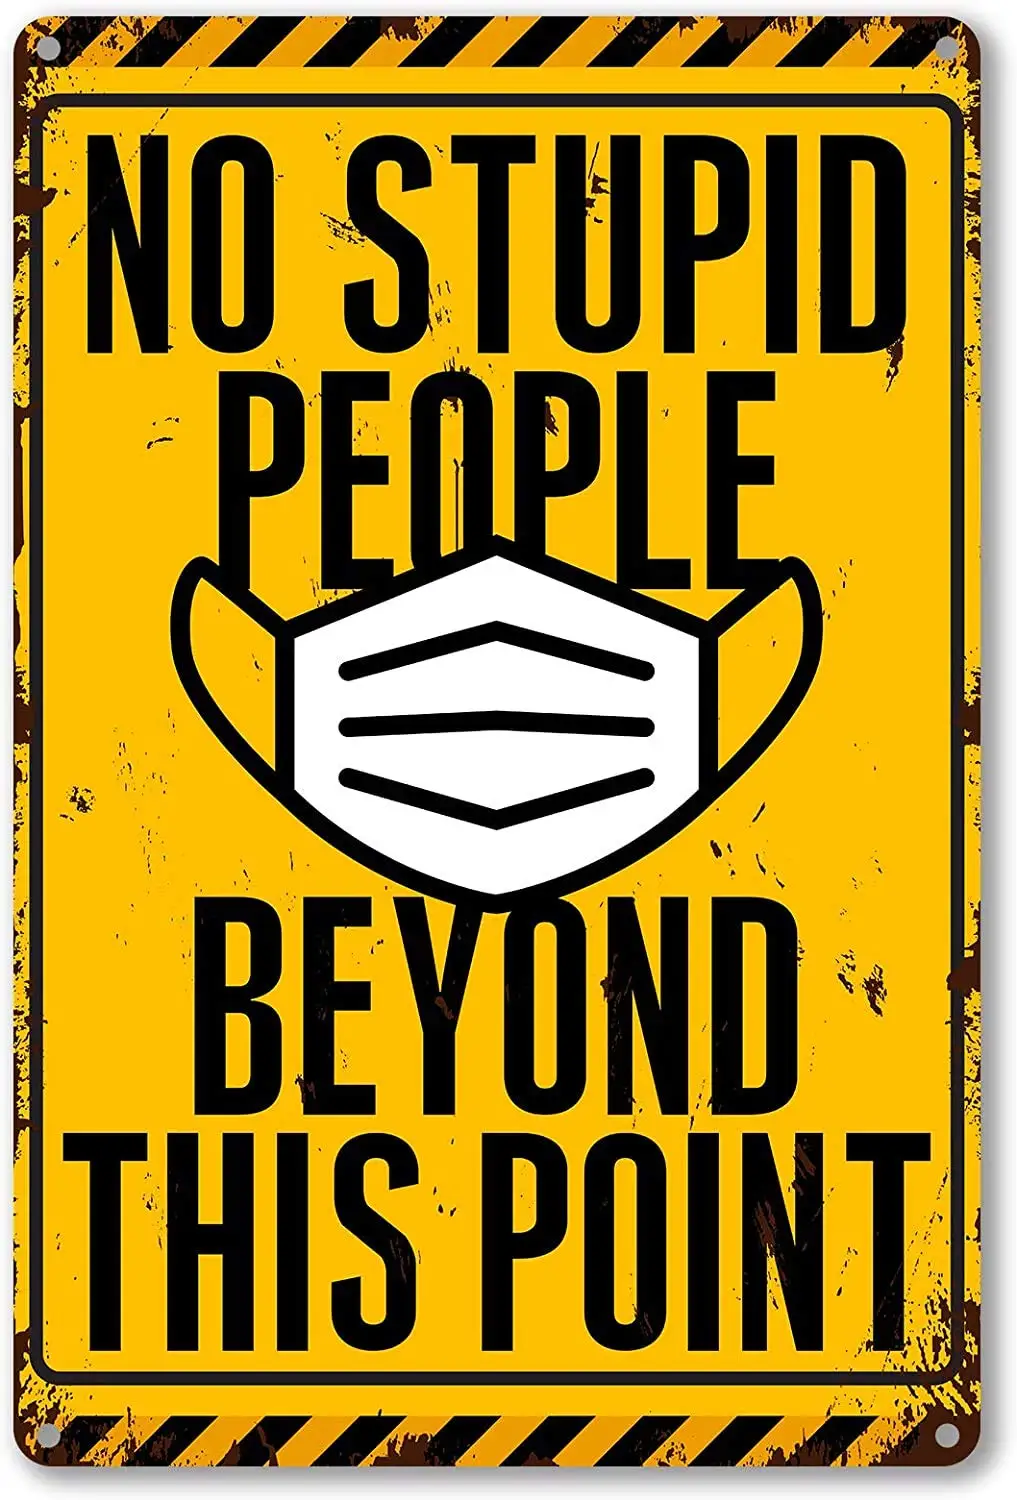 

Funny Quote No Stupid People Metal Wall Decor Vintage No Stupid People Beyond This Point for Bar Home Garage Cafe Pub Best Ret